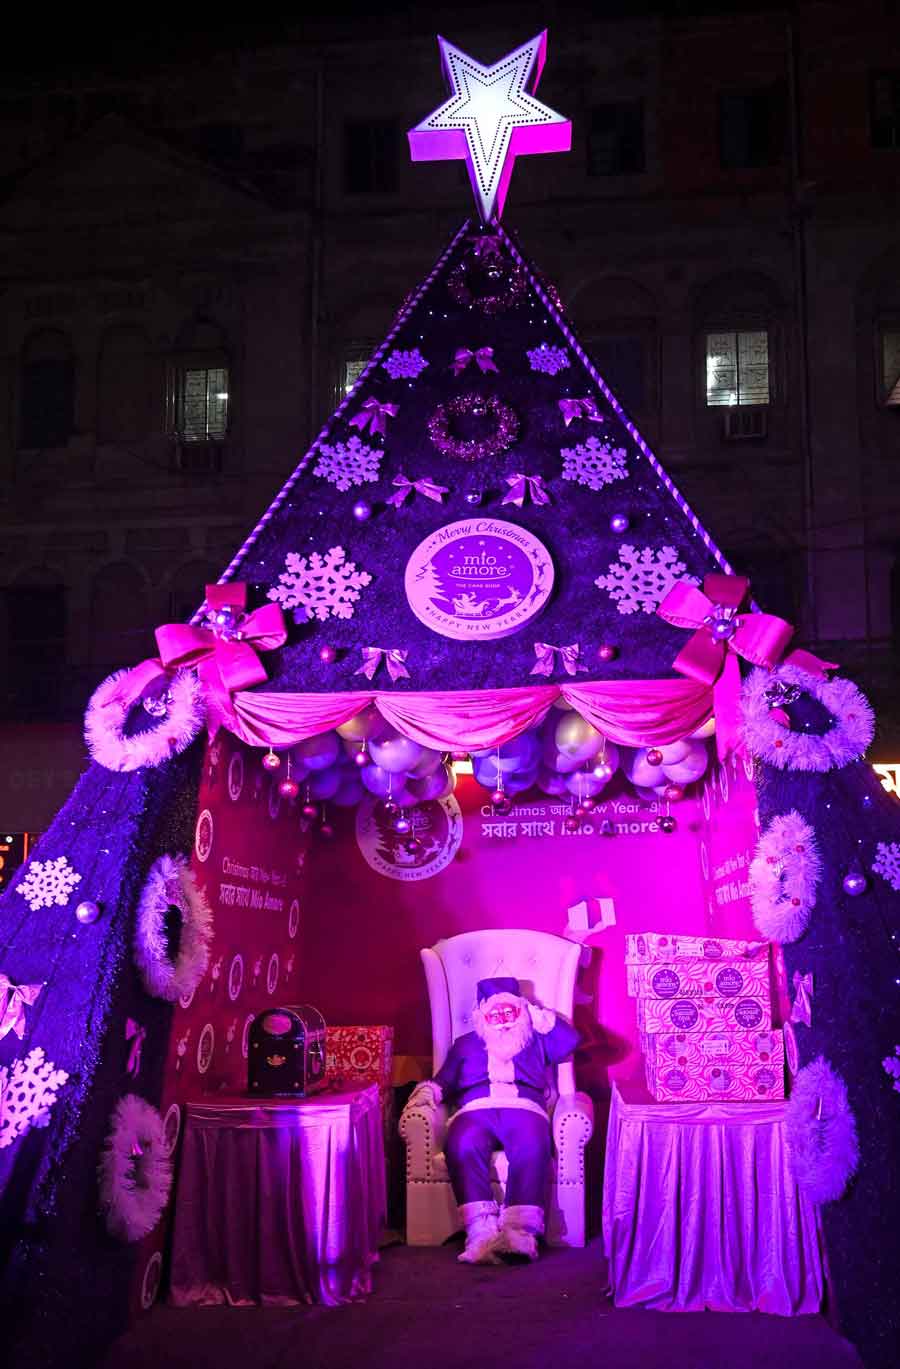 The huge, purple Christmas tree was a work of art complete with photo-op spaces and sitting under the tree was purple Santa. Children rushed to Santa, who gave out goodies from the bakery and clicked photographs with them